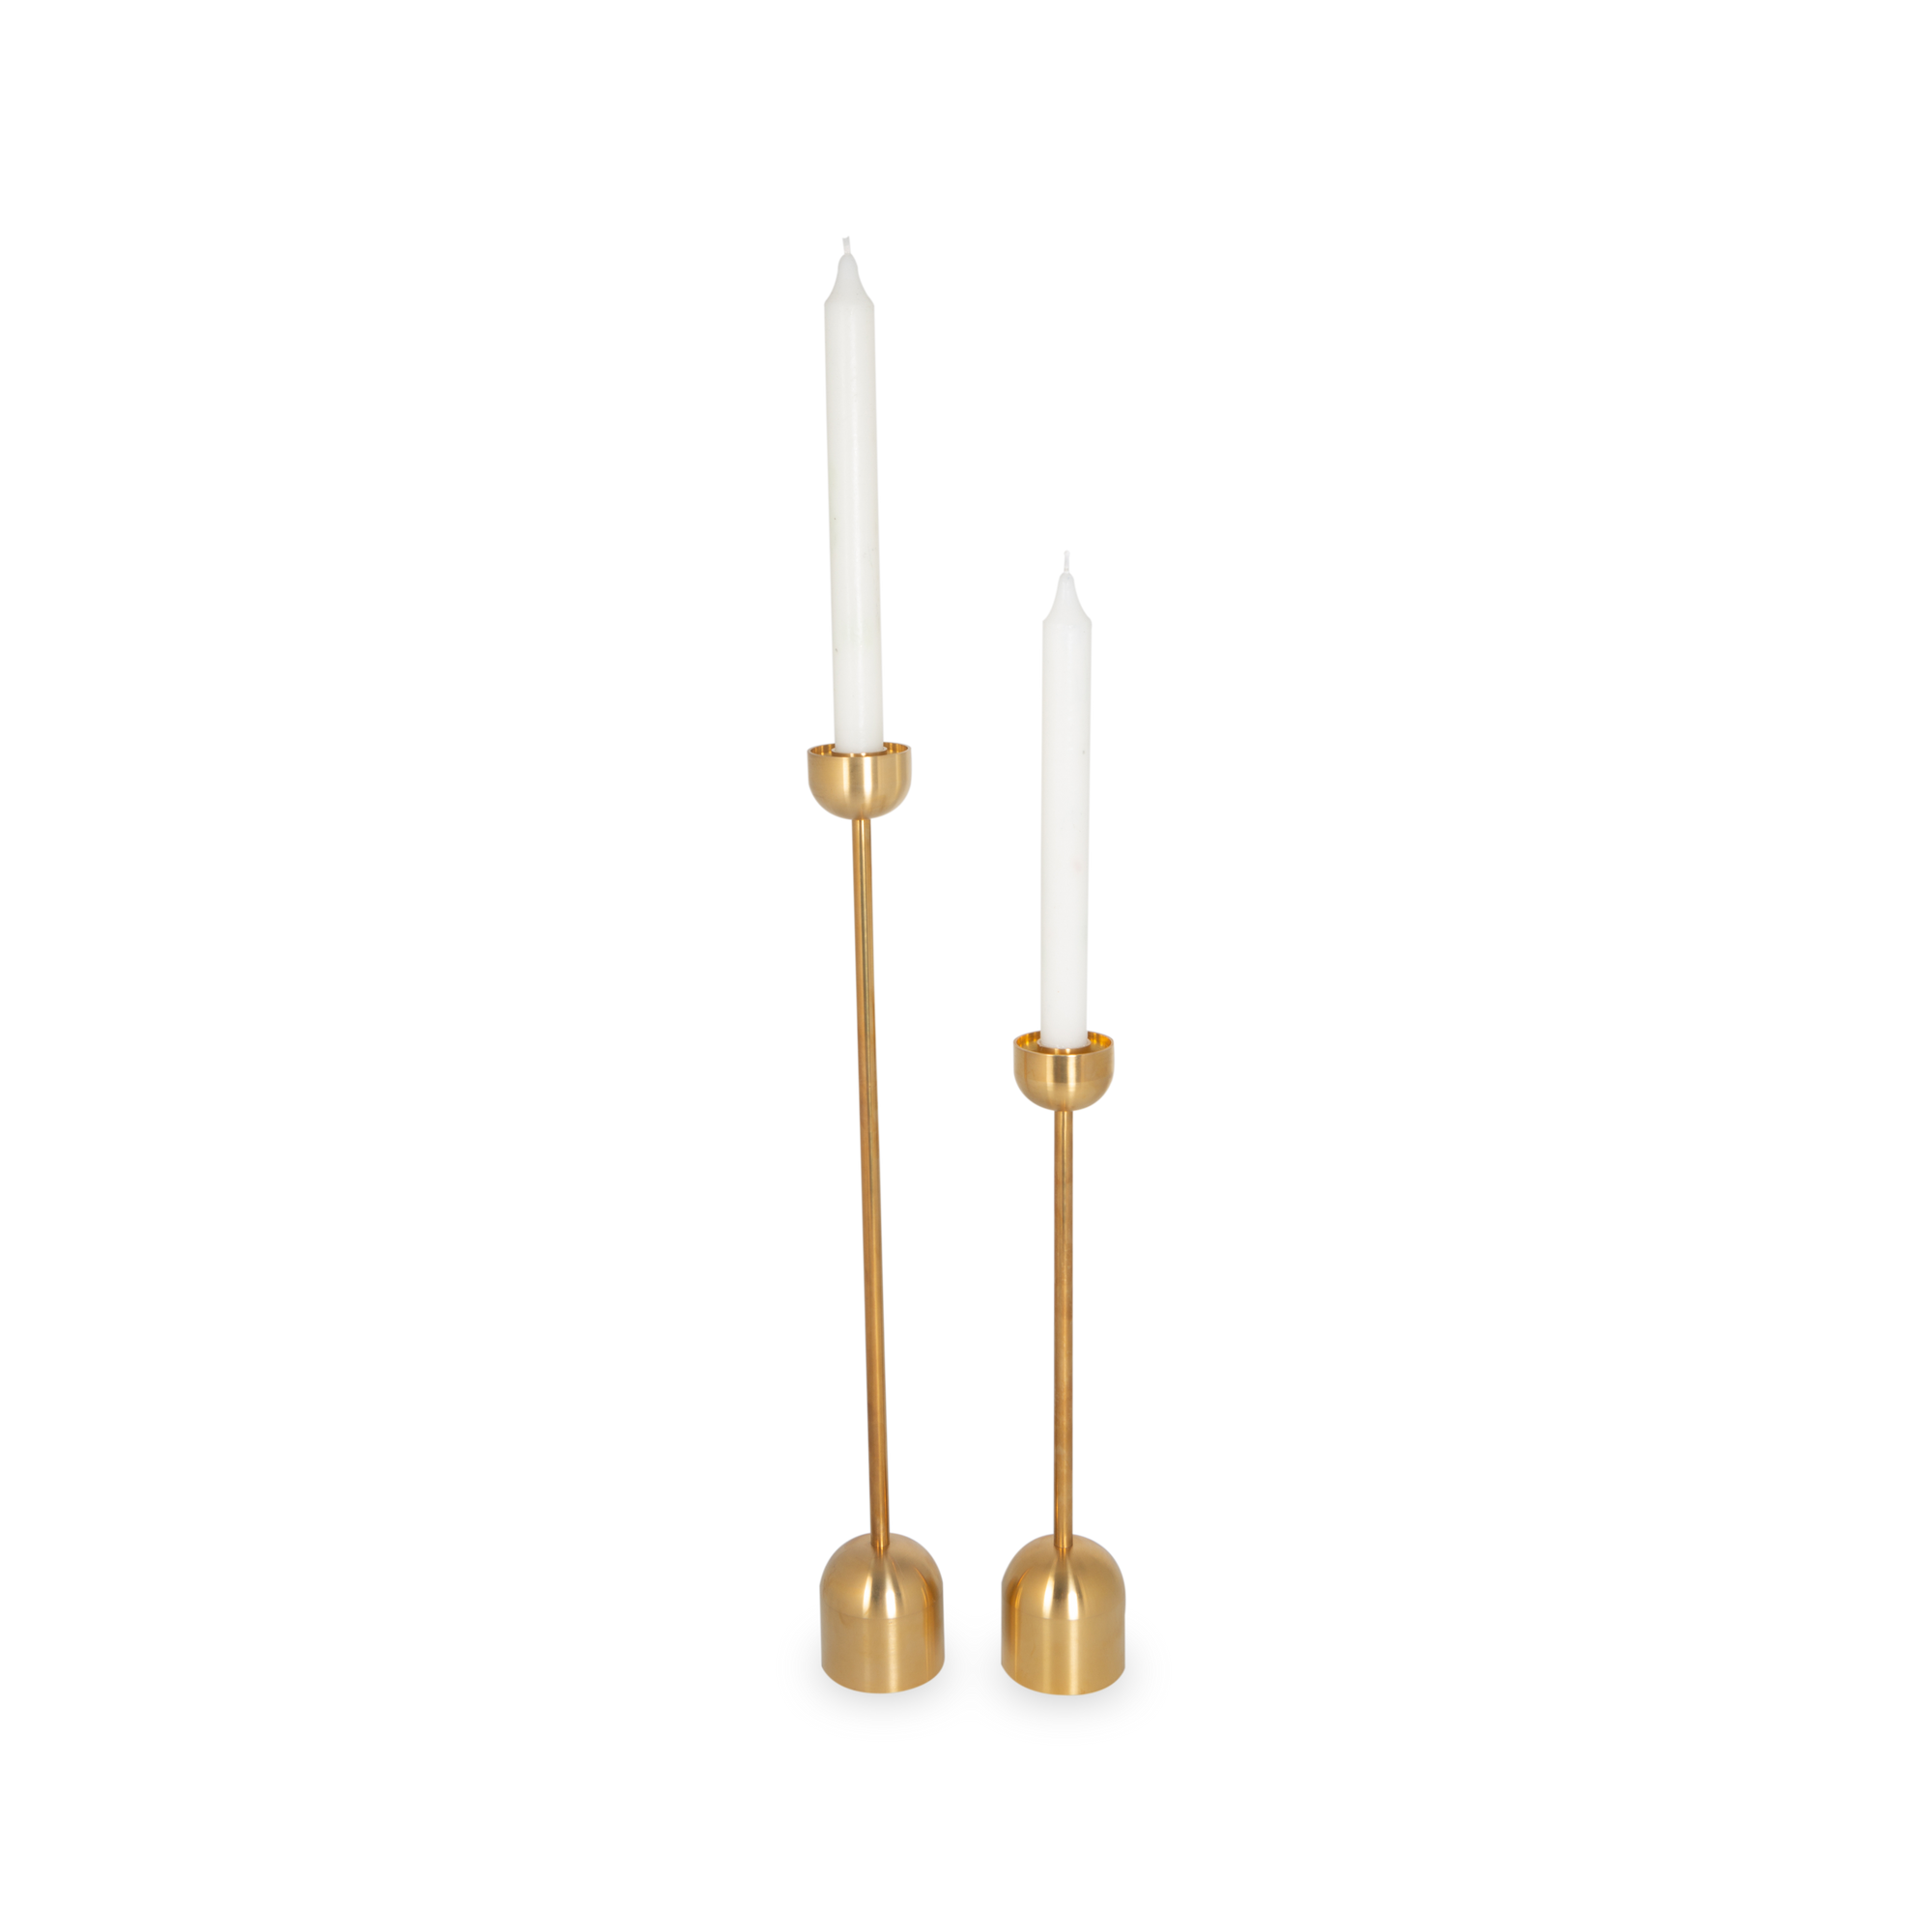 This tall, simple dome shaped candleholder collection is fashioned from solid brass.